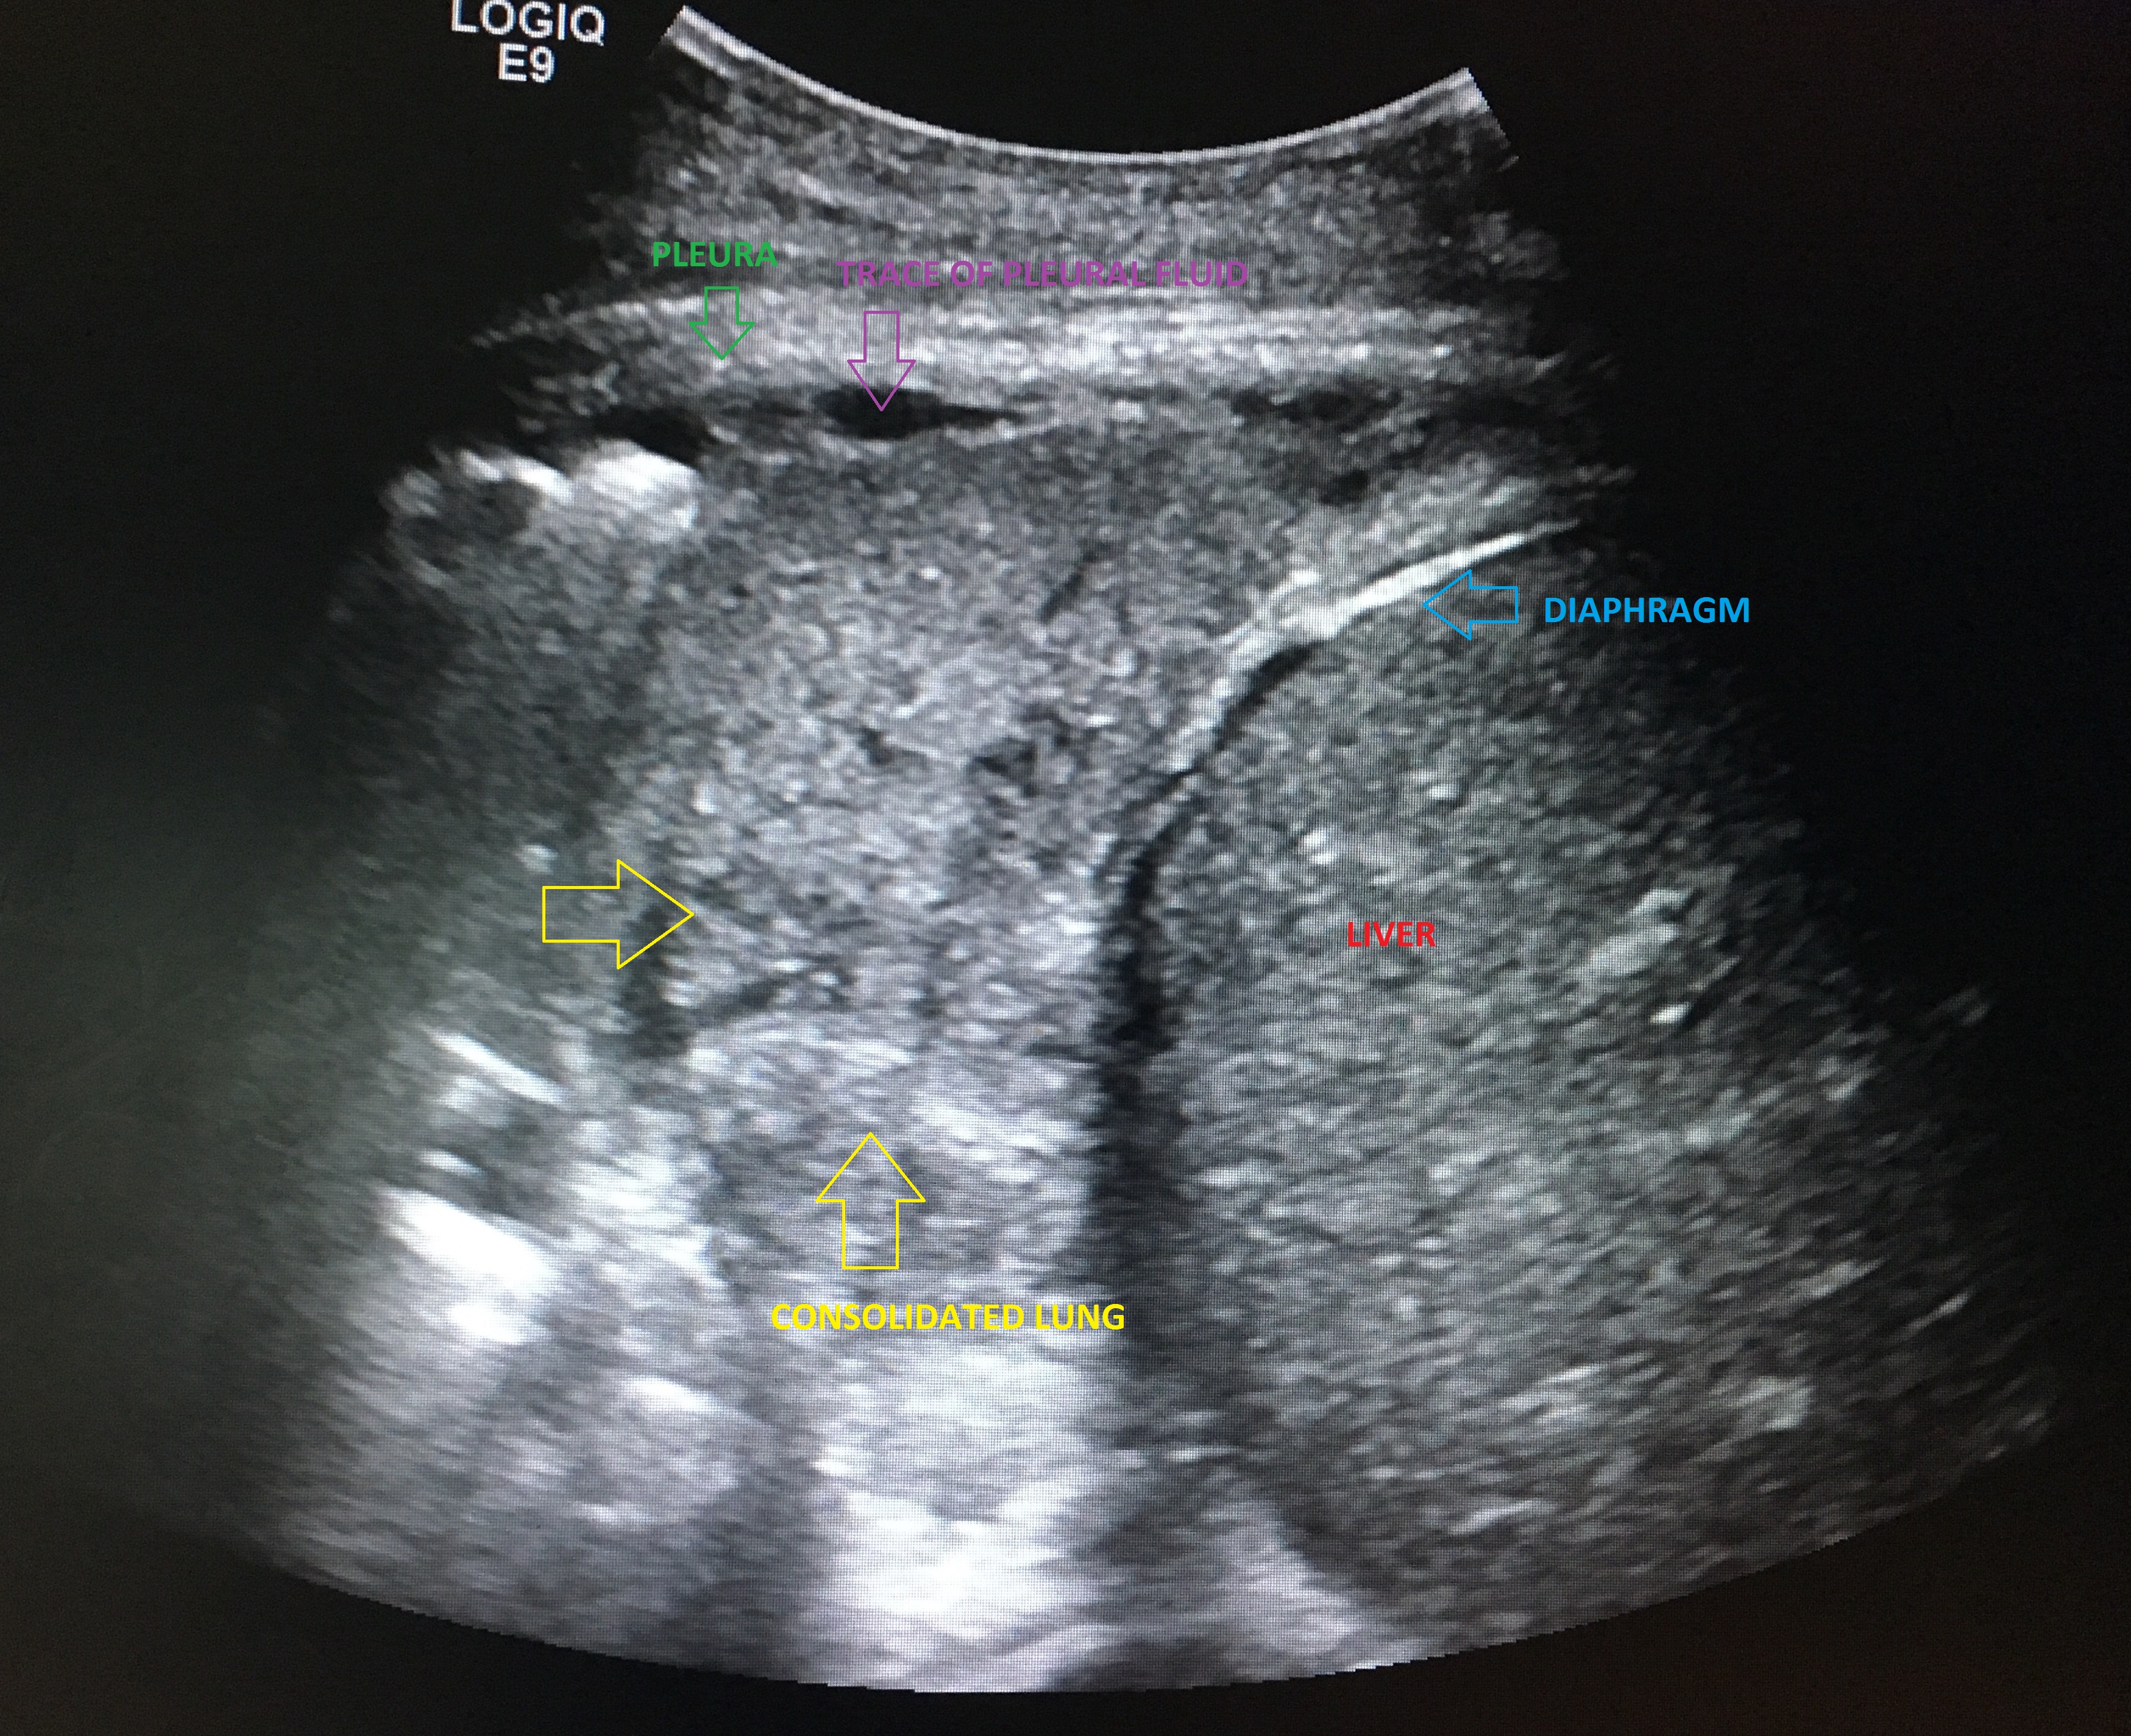 File:Lung-consolidation-on-ultrasound.jpeg